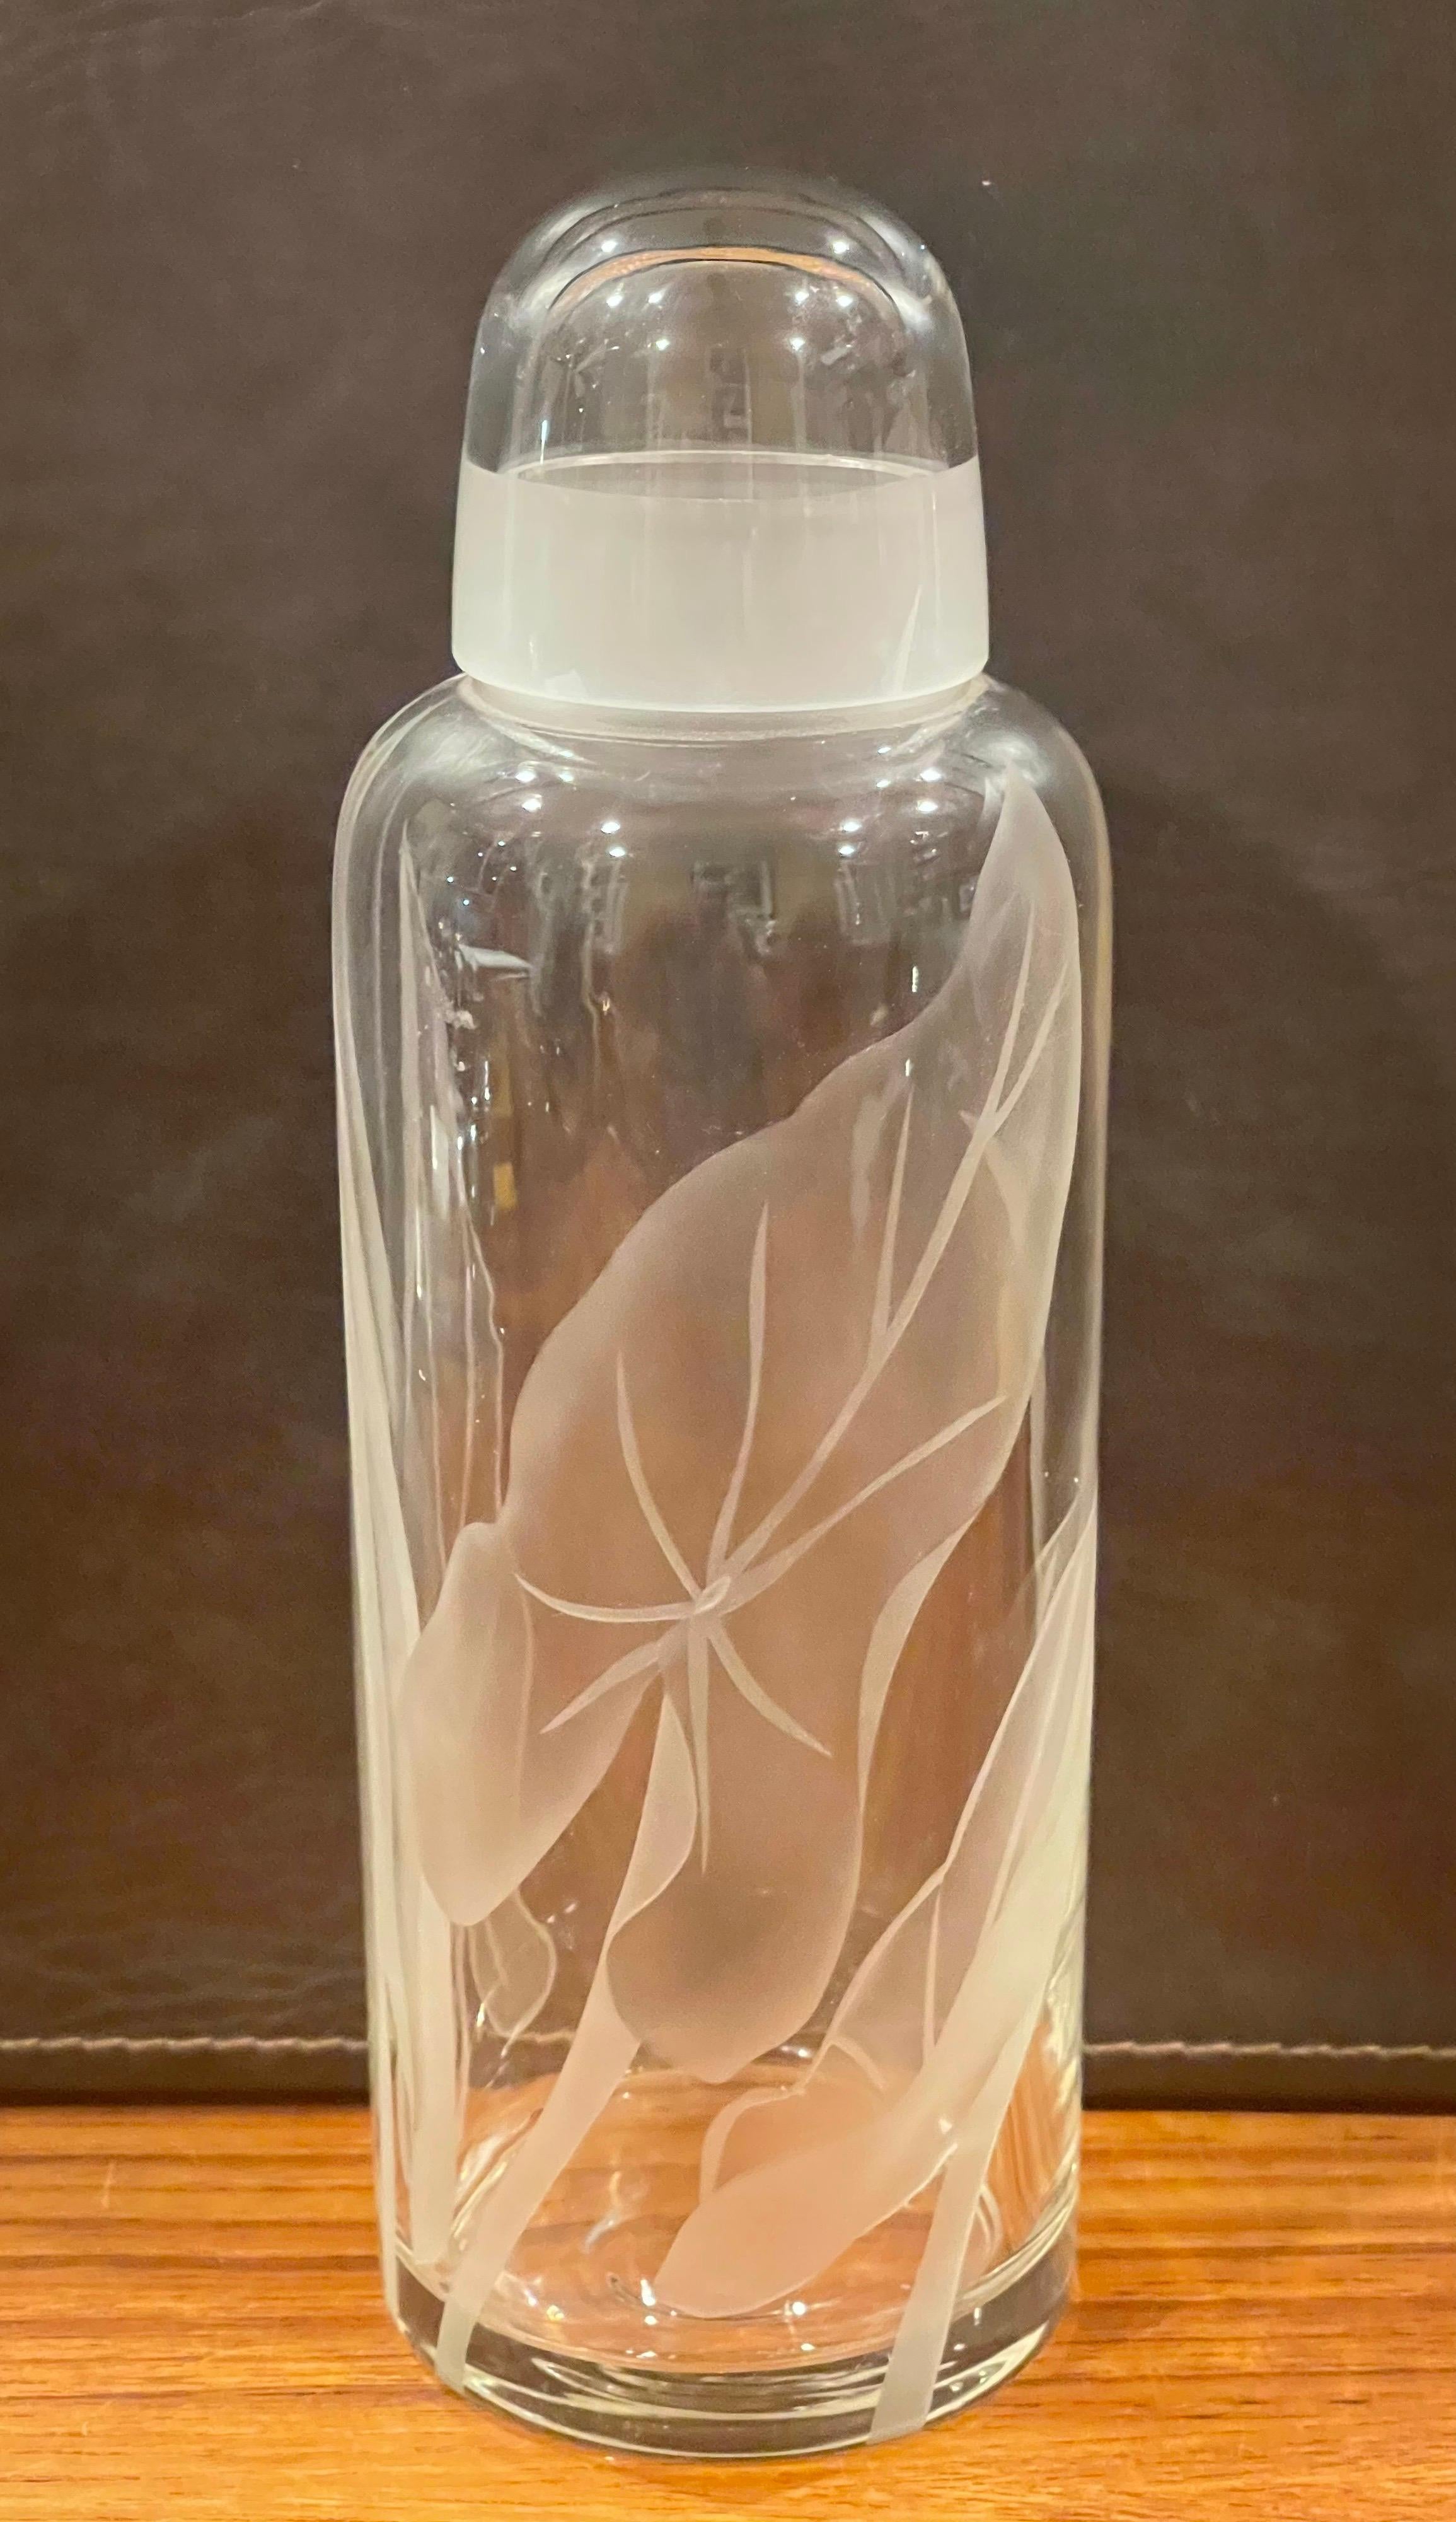 A beautiful mid-century etched glass floral decanter with lid by Dorothy Thorpe, circa 1970s. The decanter measures 3.5